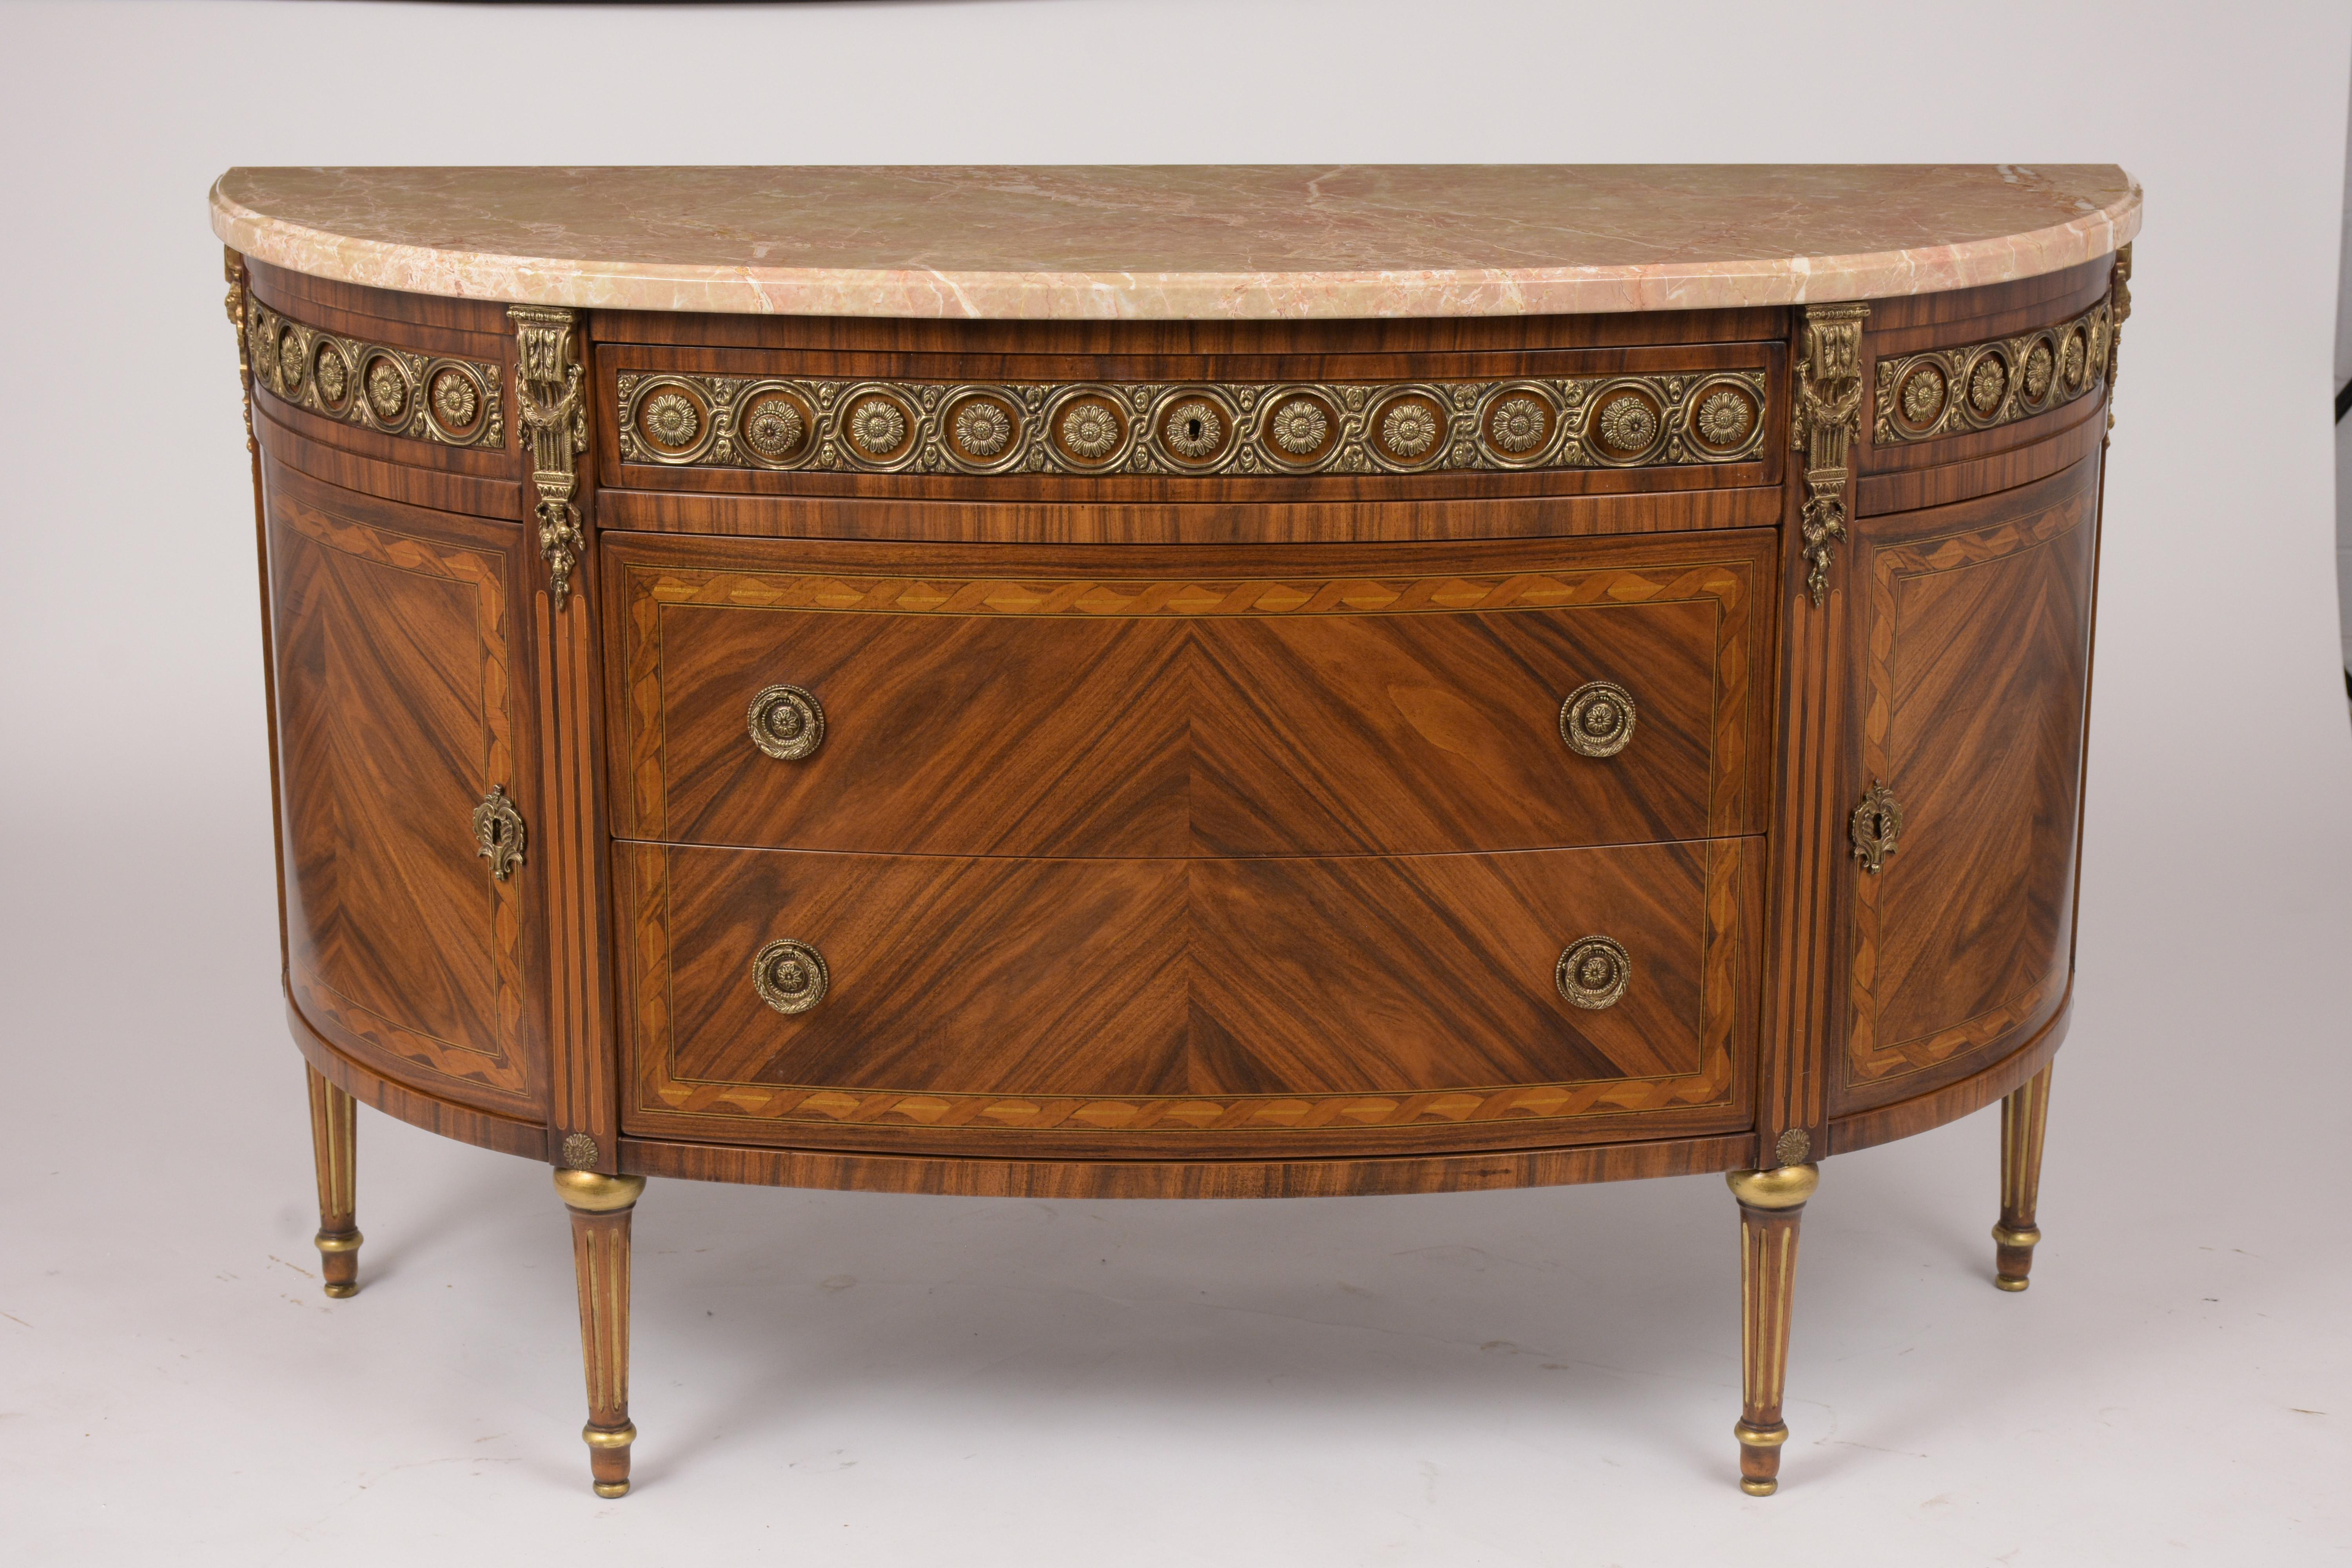 This French Louis XVI Style Demilune Server features a bevel marble top, marquetry design, and beautiful inlaid details throughout the piece. The buffet comes with an intricately detailed brass accent gallery along the top and large top drawer that